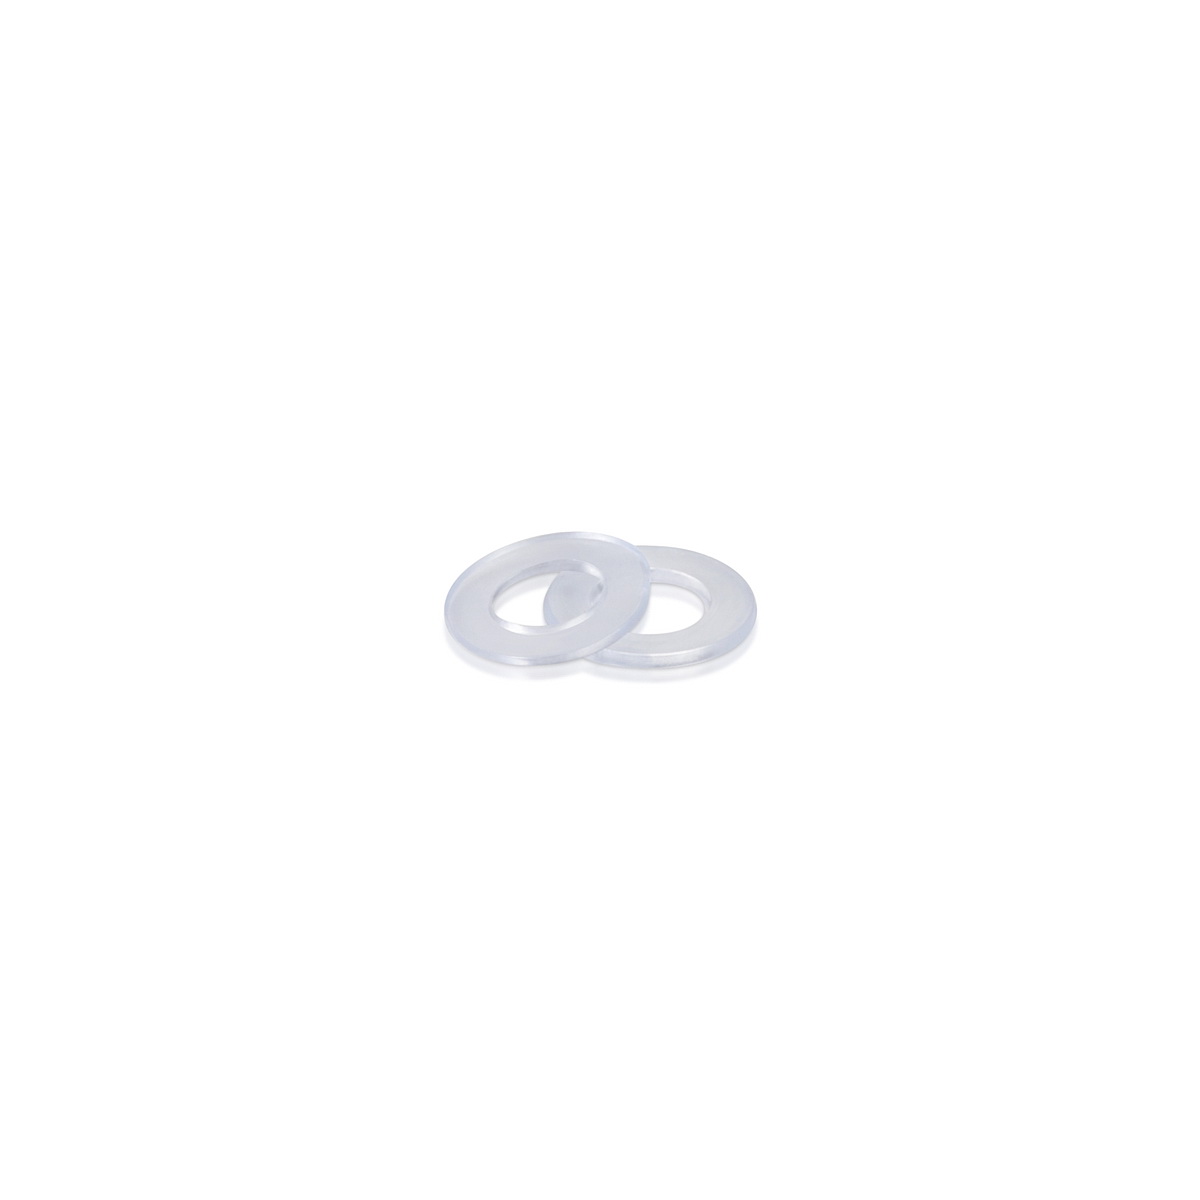 Silicone Washer, 5/8'' OD x 5/16'' ID x 0.05'' Thick. (For M8 or 5/16'' Stud)